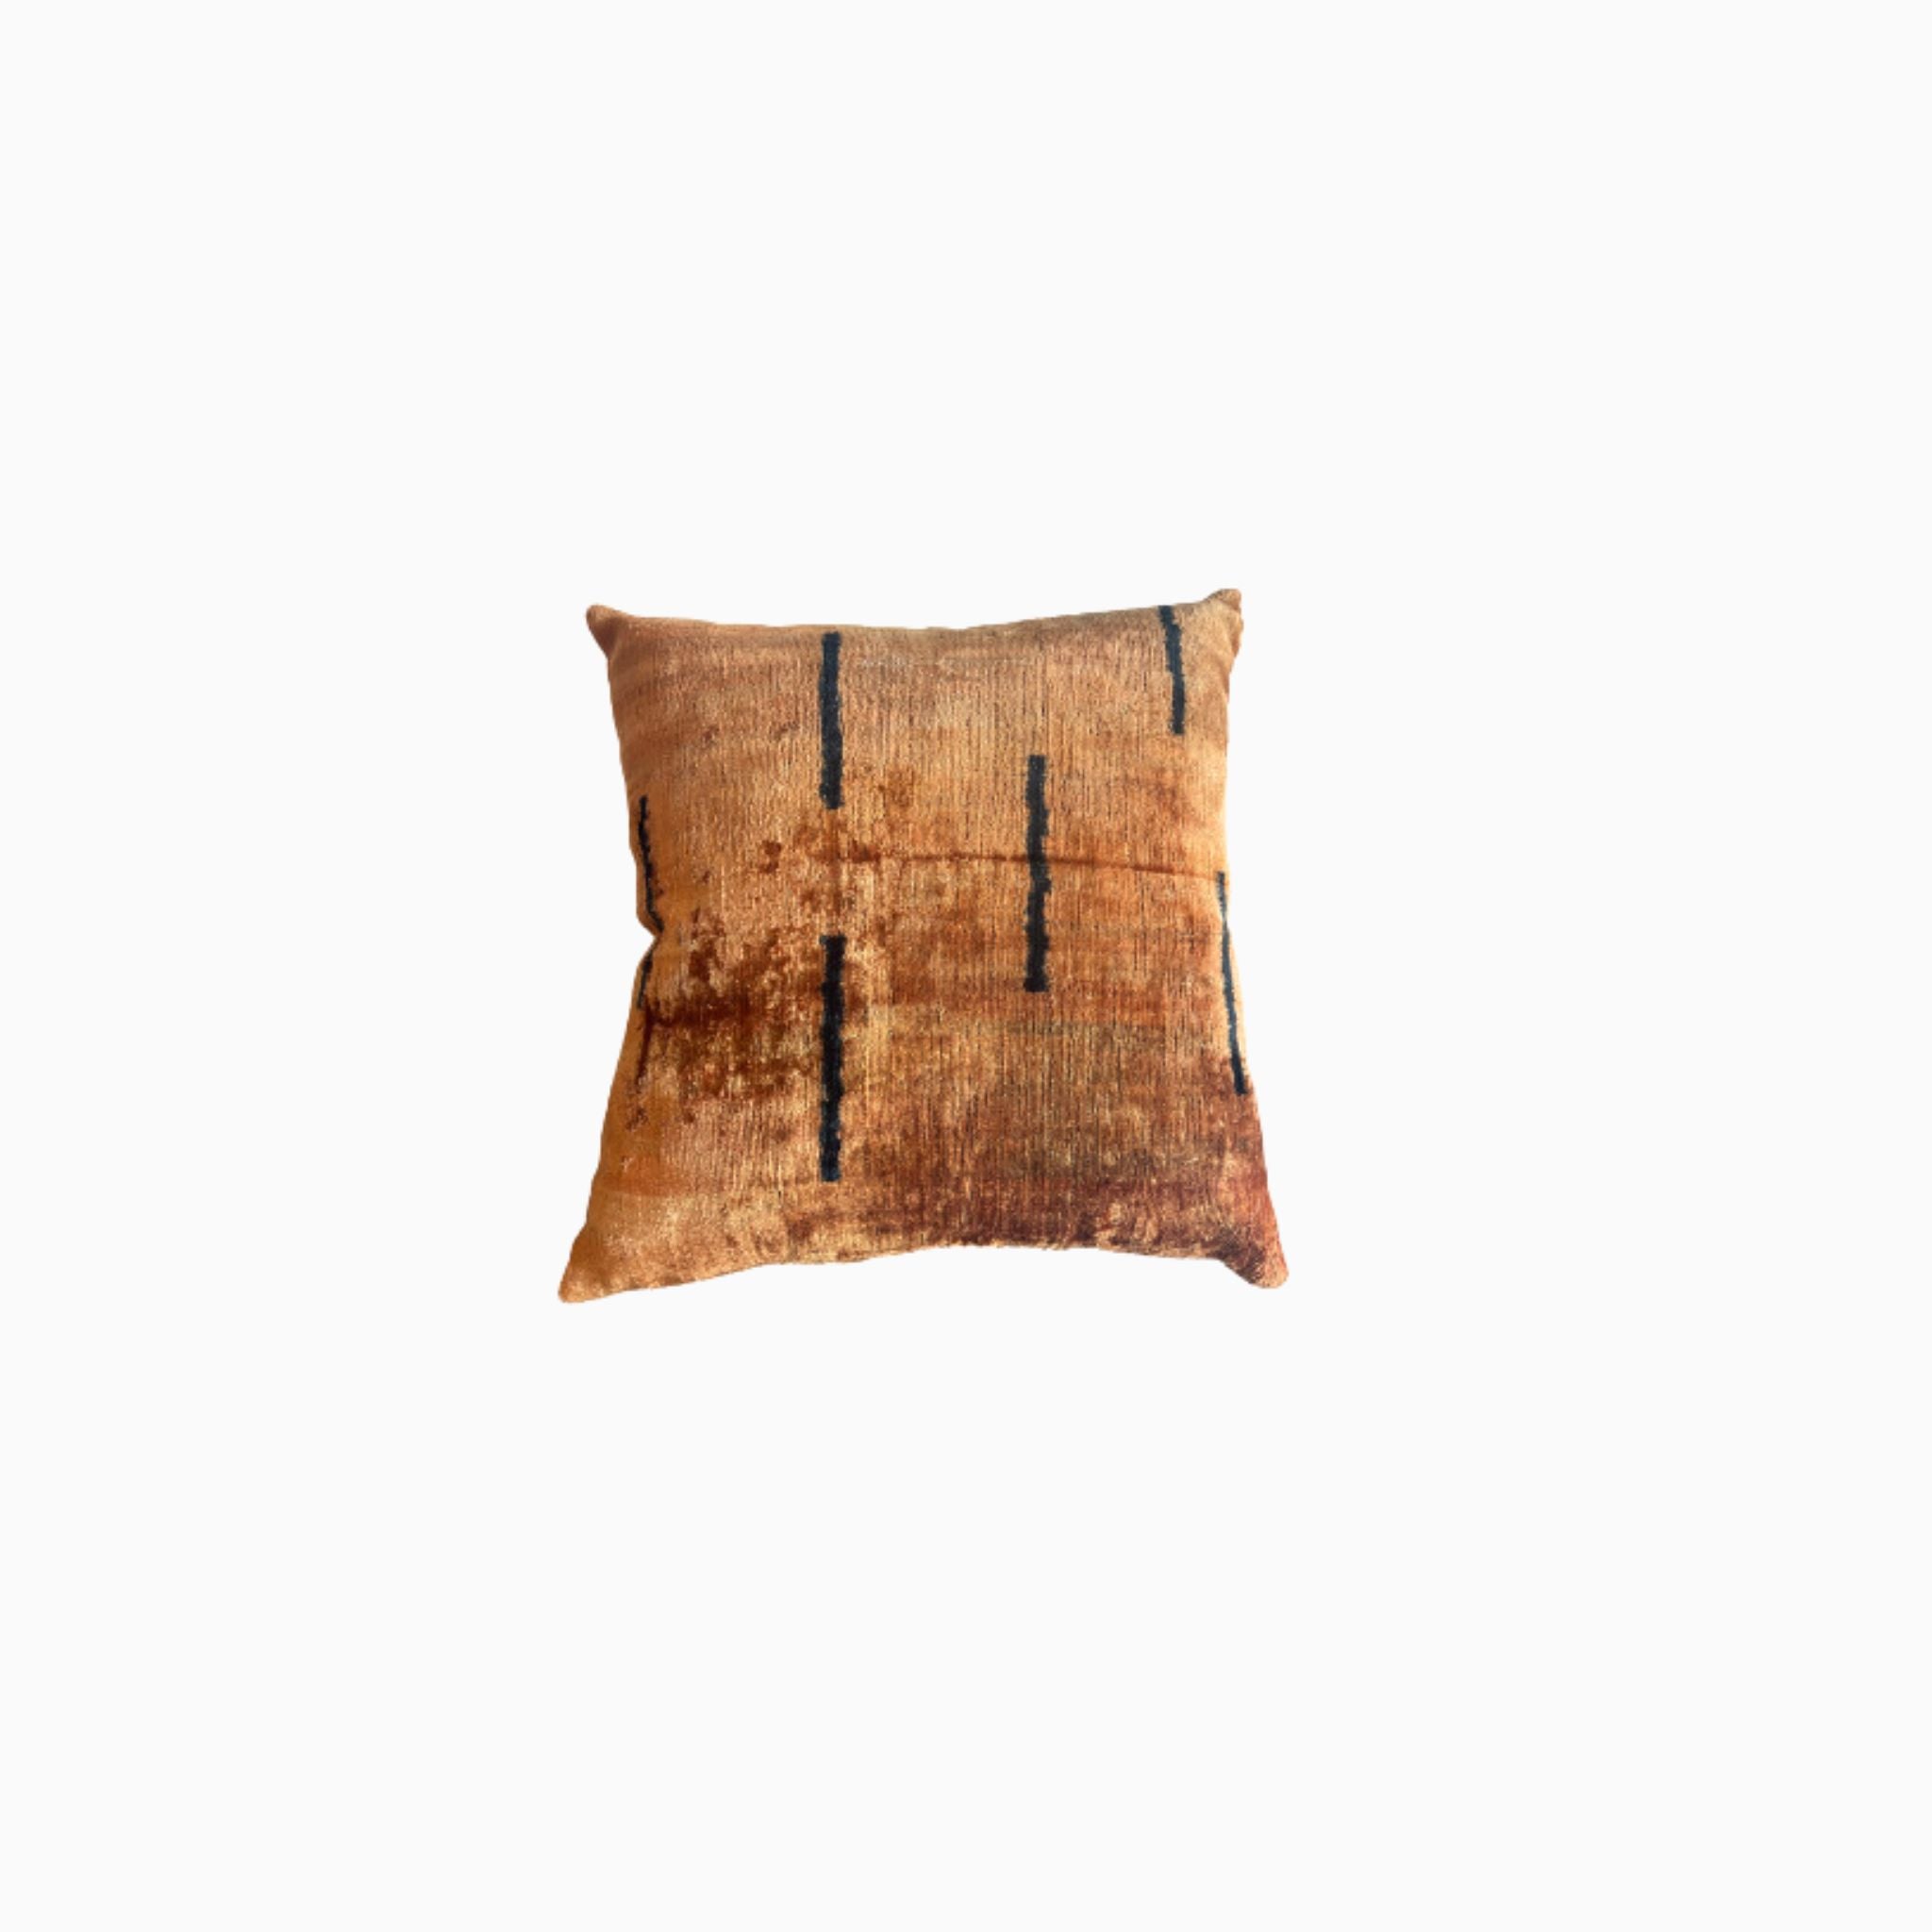 GAL THROW PILLOW - Simply Elevated Home Furnishings 